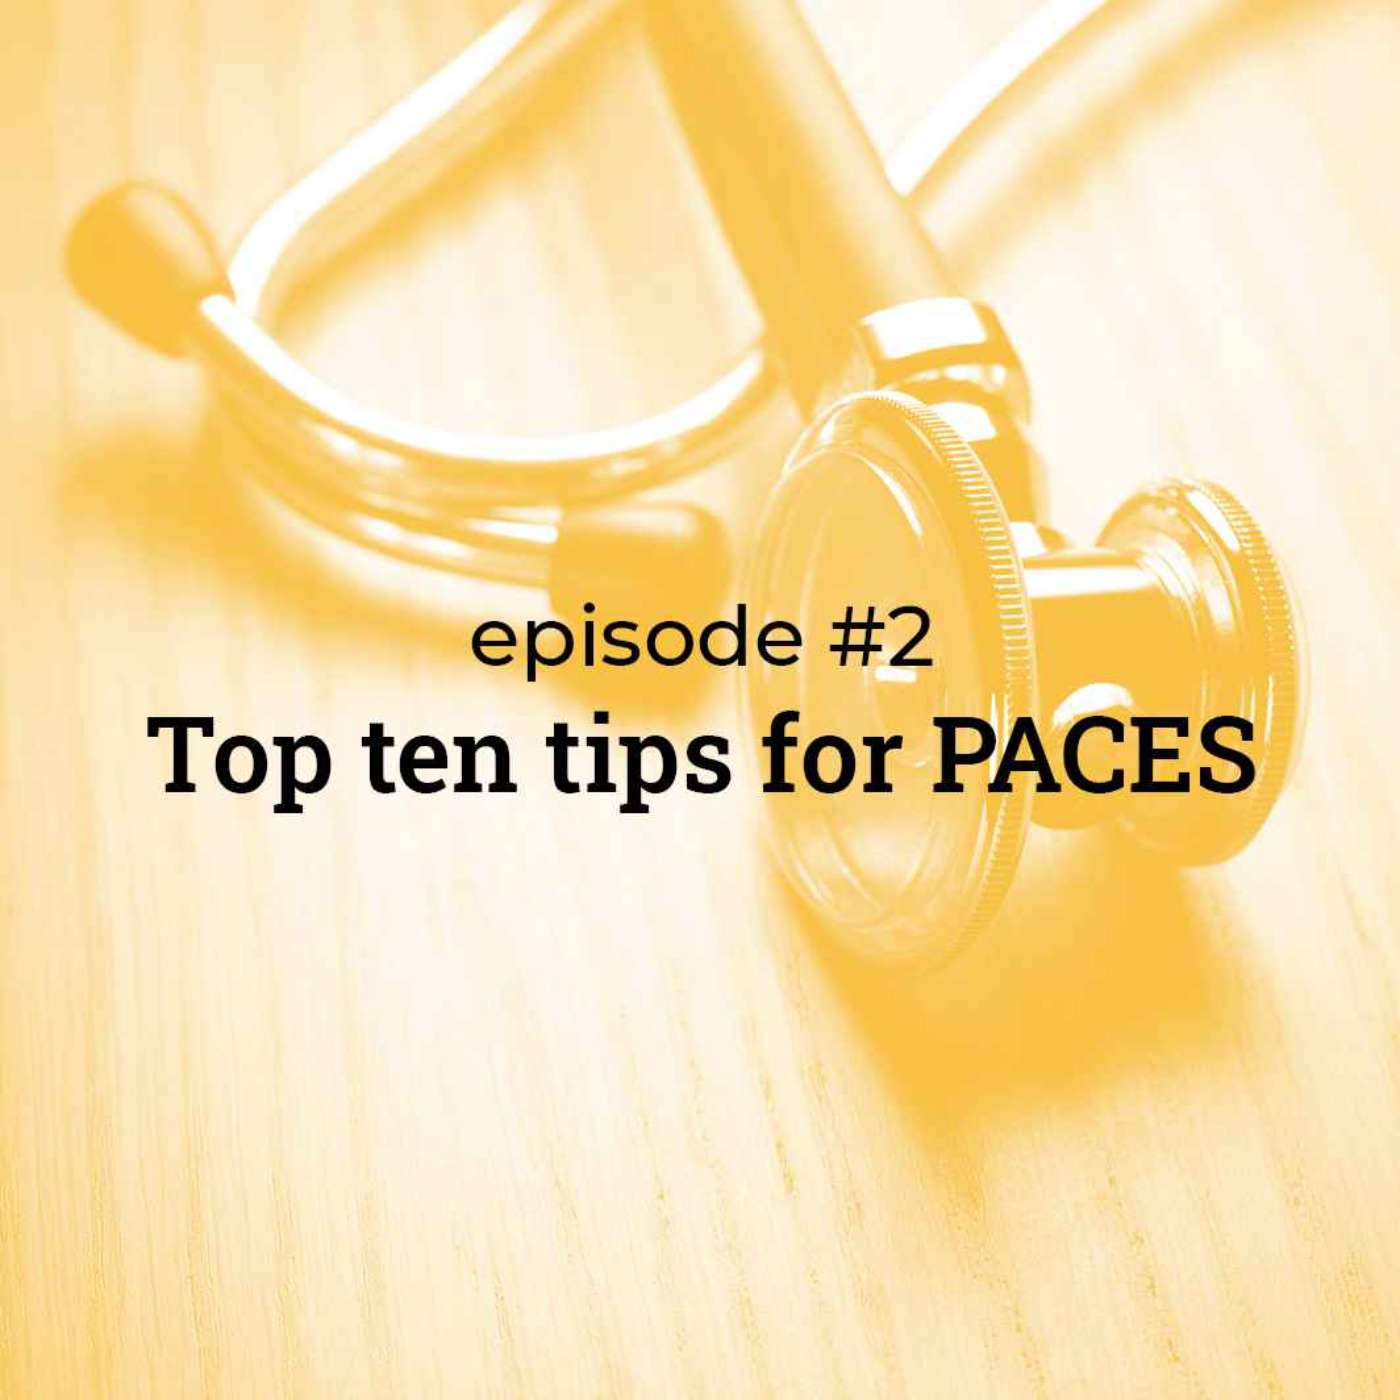 #2 Top 10 Tips & PACES during COVID